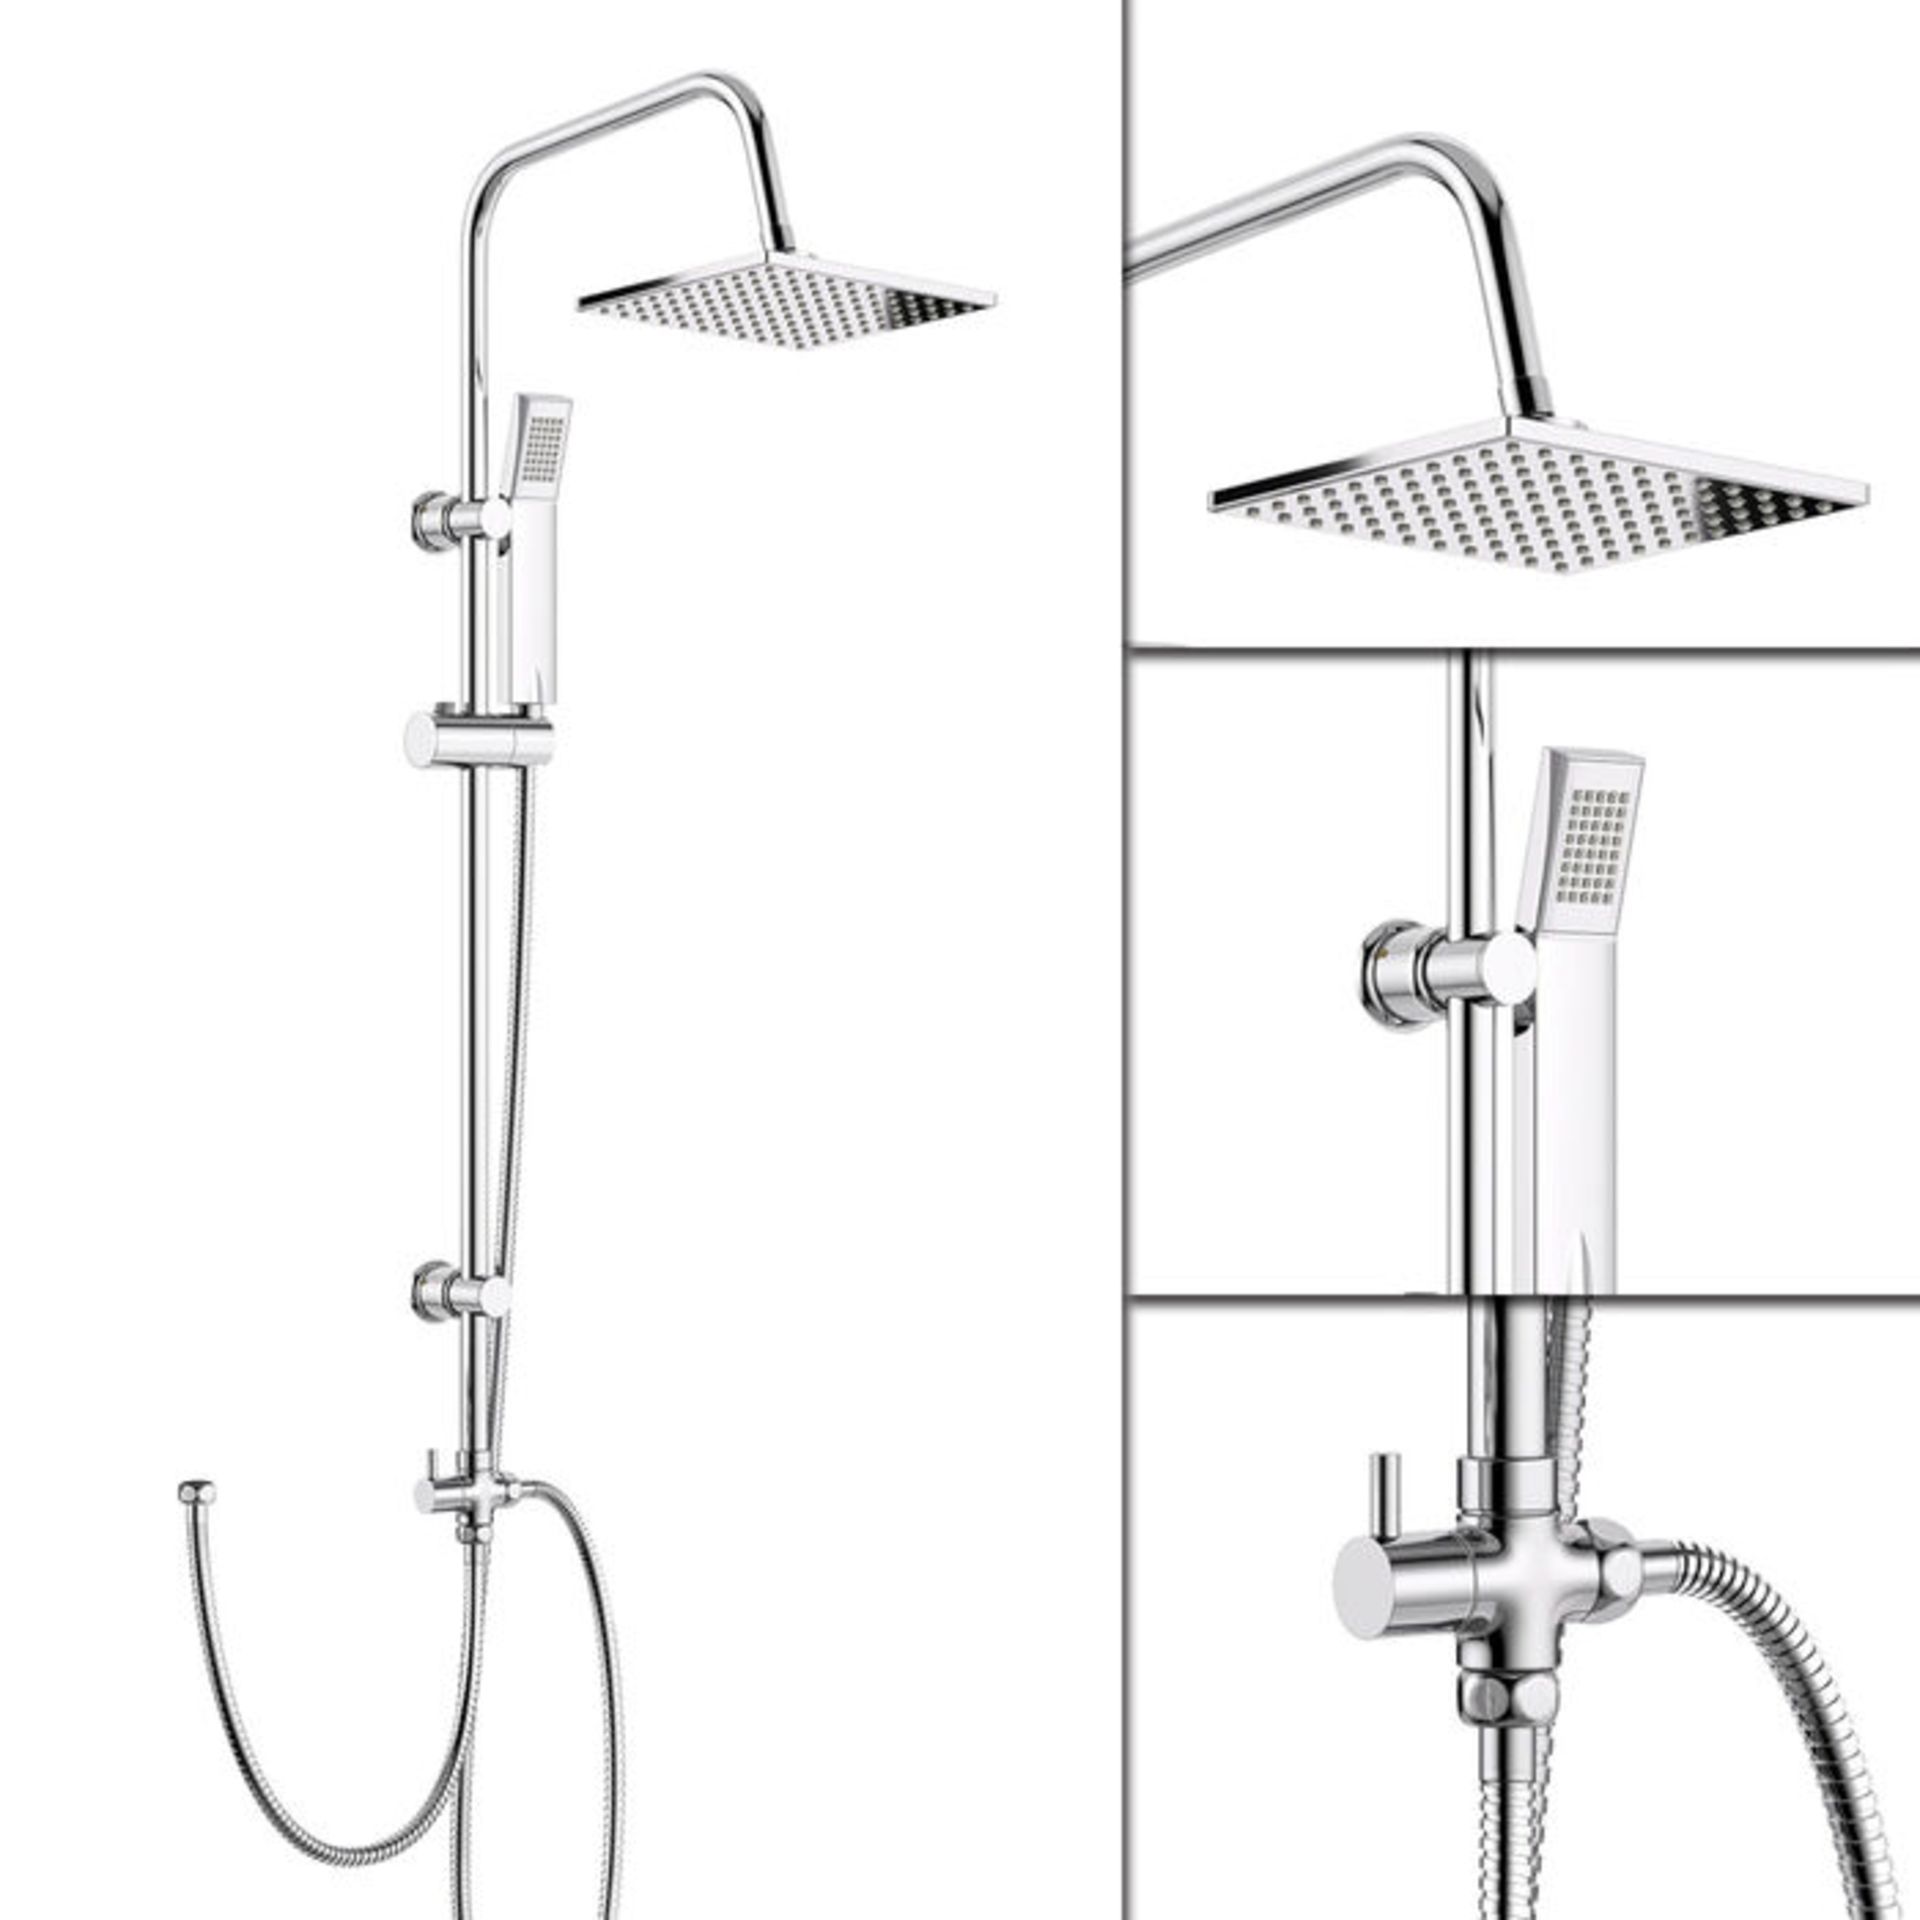 200mm Square Head, Riser Rail & Handheld Kit Quality stainless steel shower head with Easy Cle... - Image 3 of 3